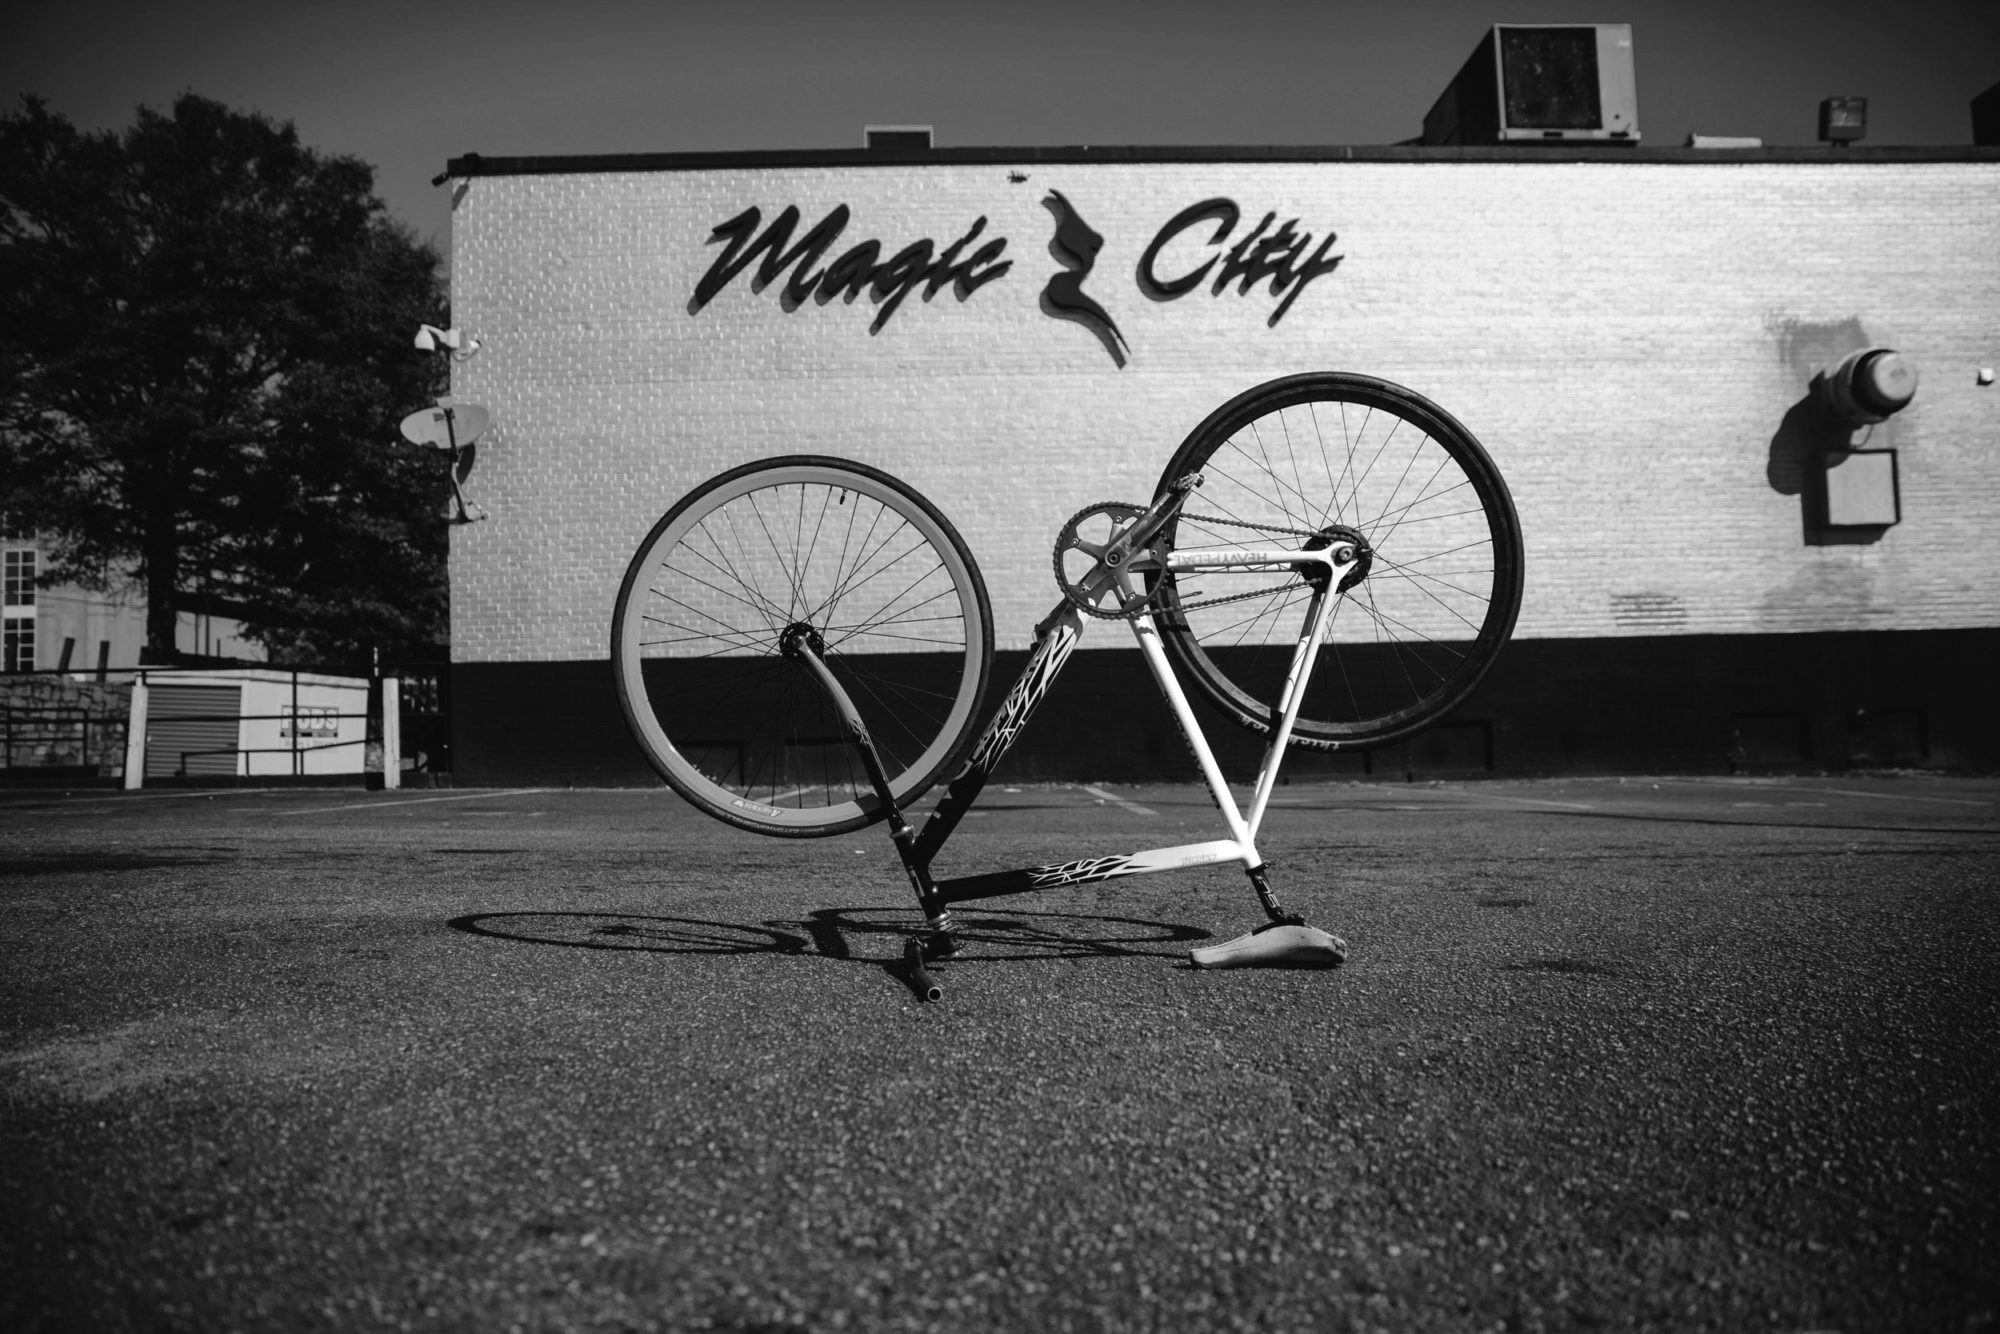 A black and white photo of an upside down bike in front of Magic City